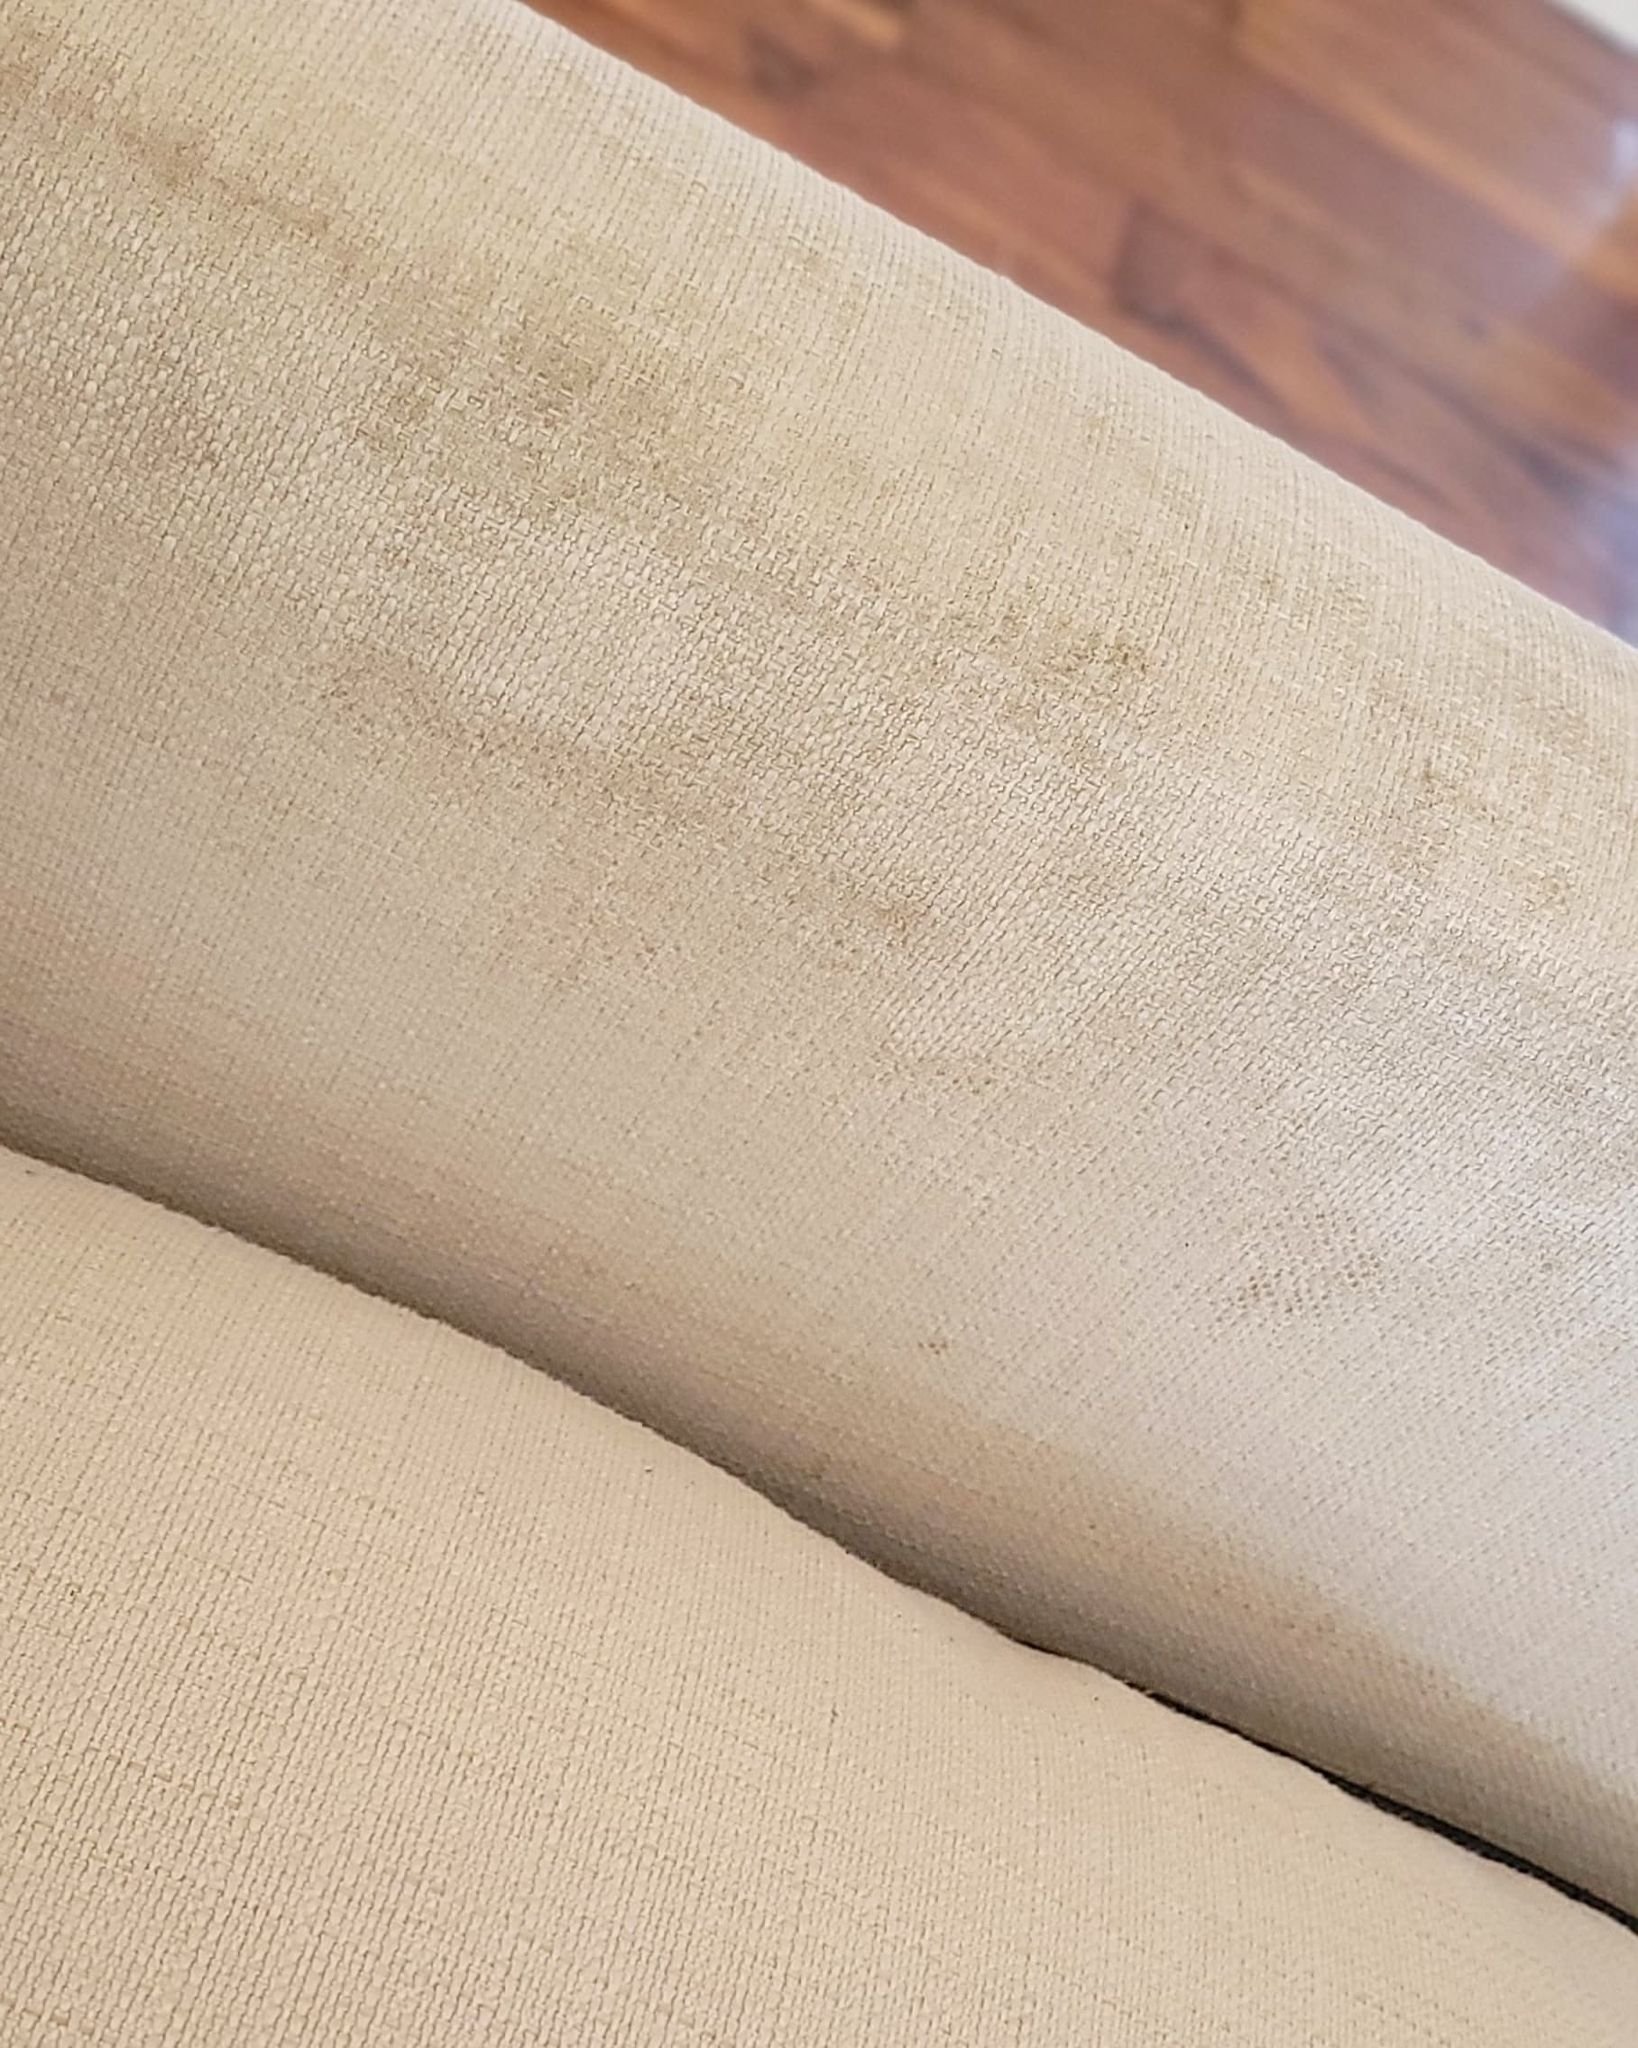 white couch stains.jpg